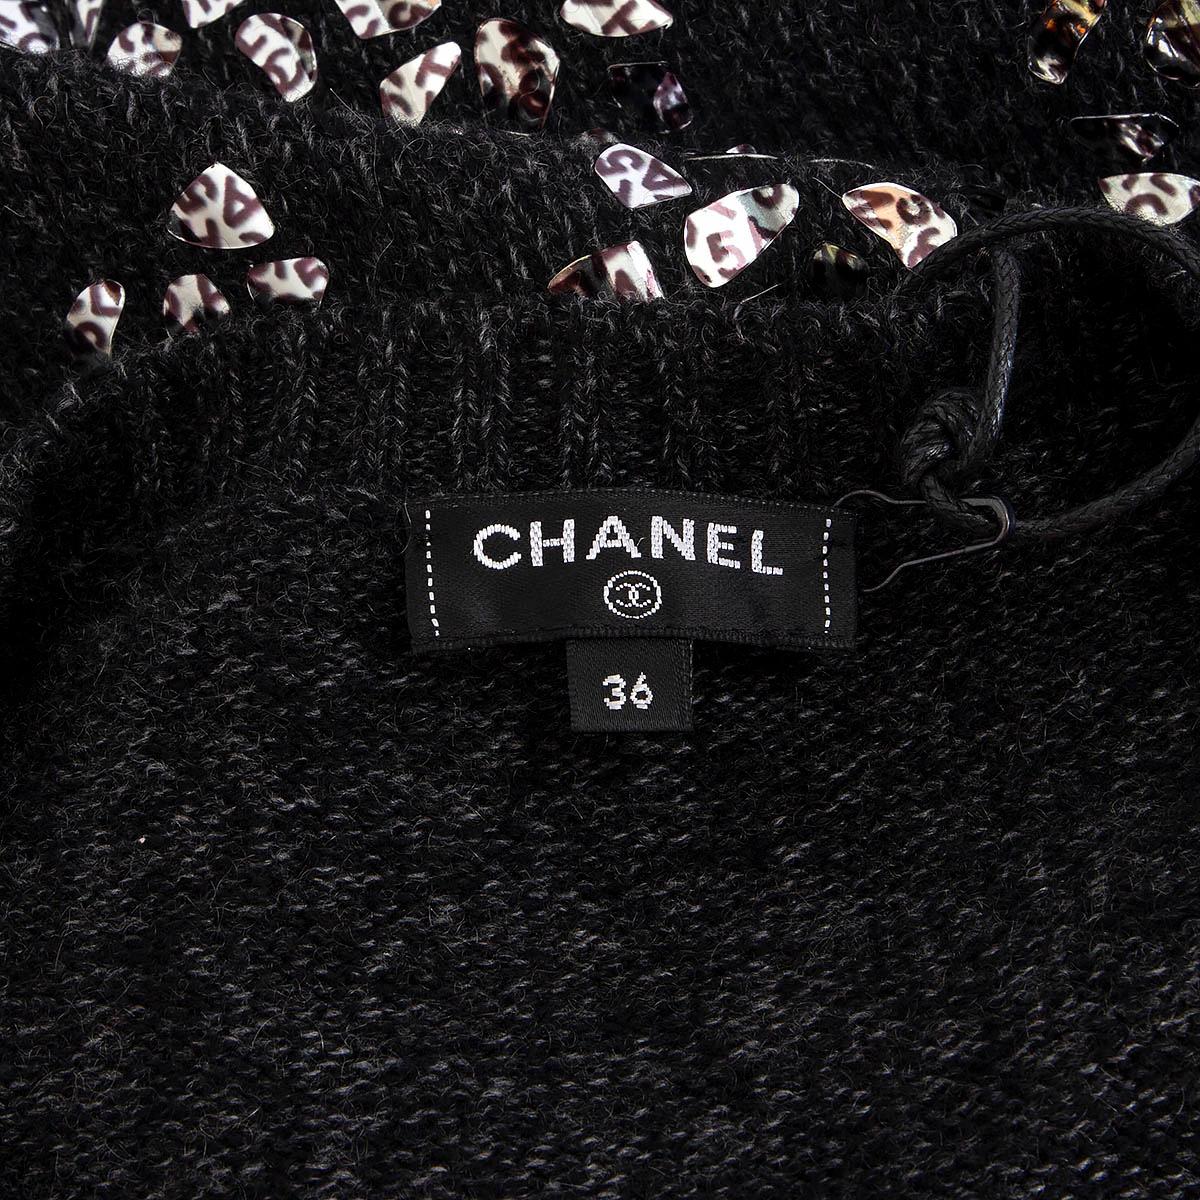 CHANEL charcoal grey cashmere 2017 MIRRORED Sweater 36 XS For Sale 3